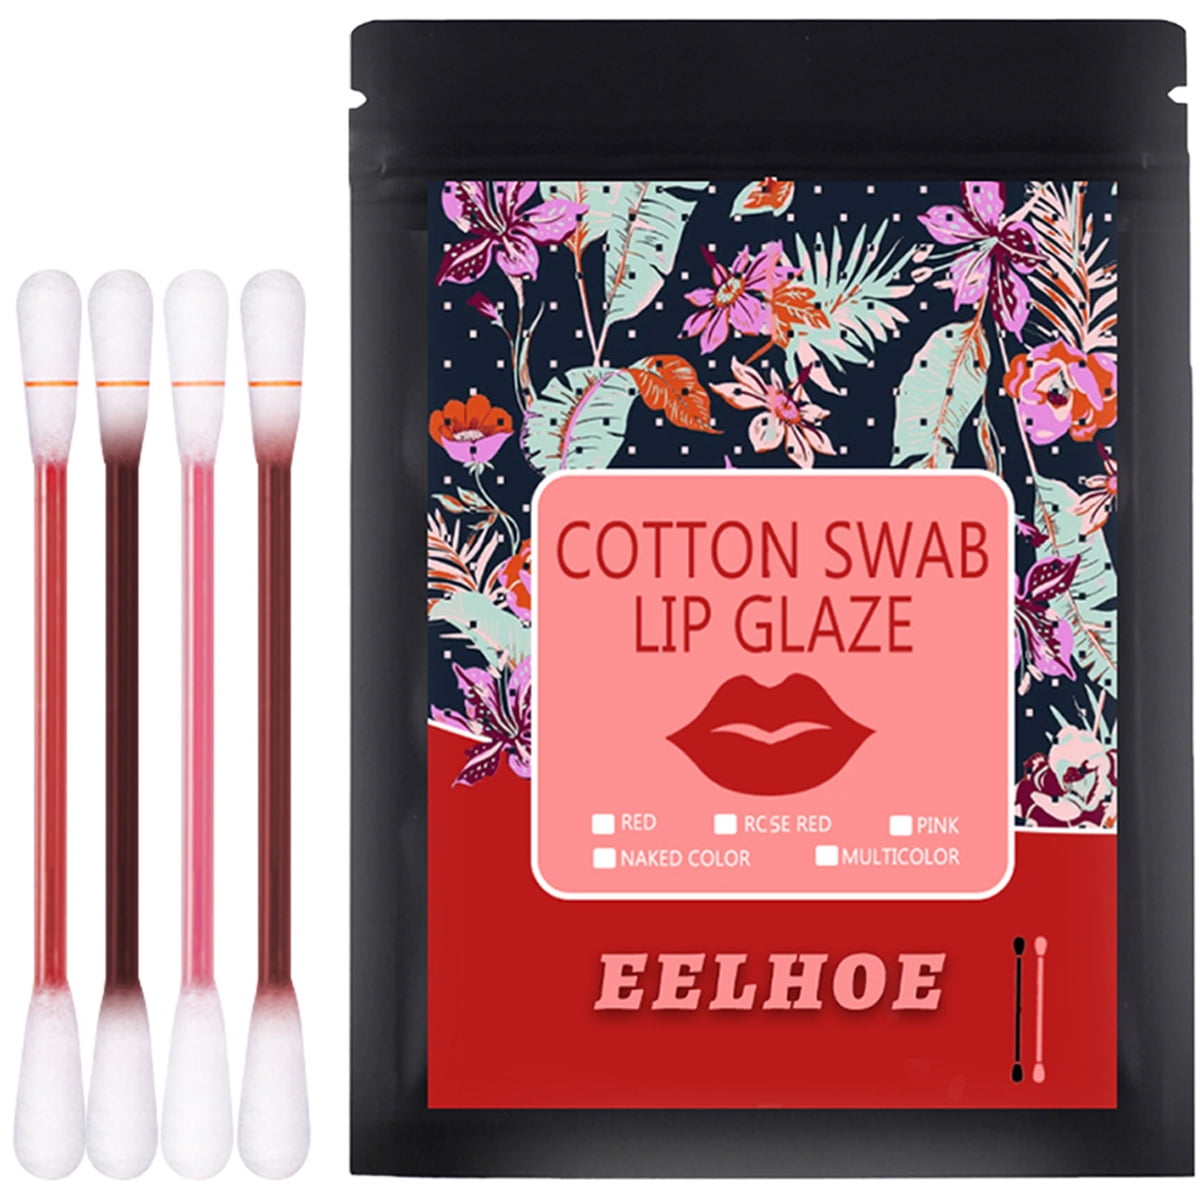 Lieonvis 20Pcs Cigarette Lipstick Waterproof Non-Stick Tattoo Lipstick Portable Cotton Swab Lipstick Long Lasting Lip Matte Valentines Day Gifts for Mother Wife and Girlfriend